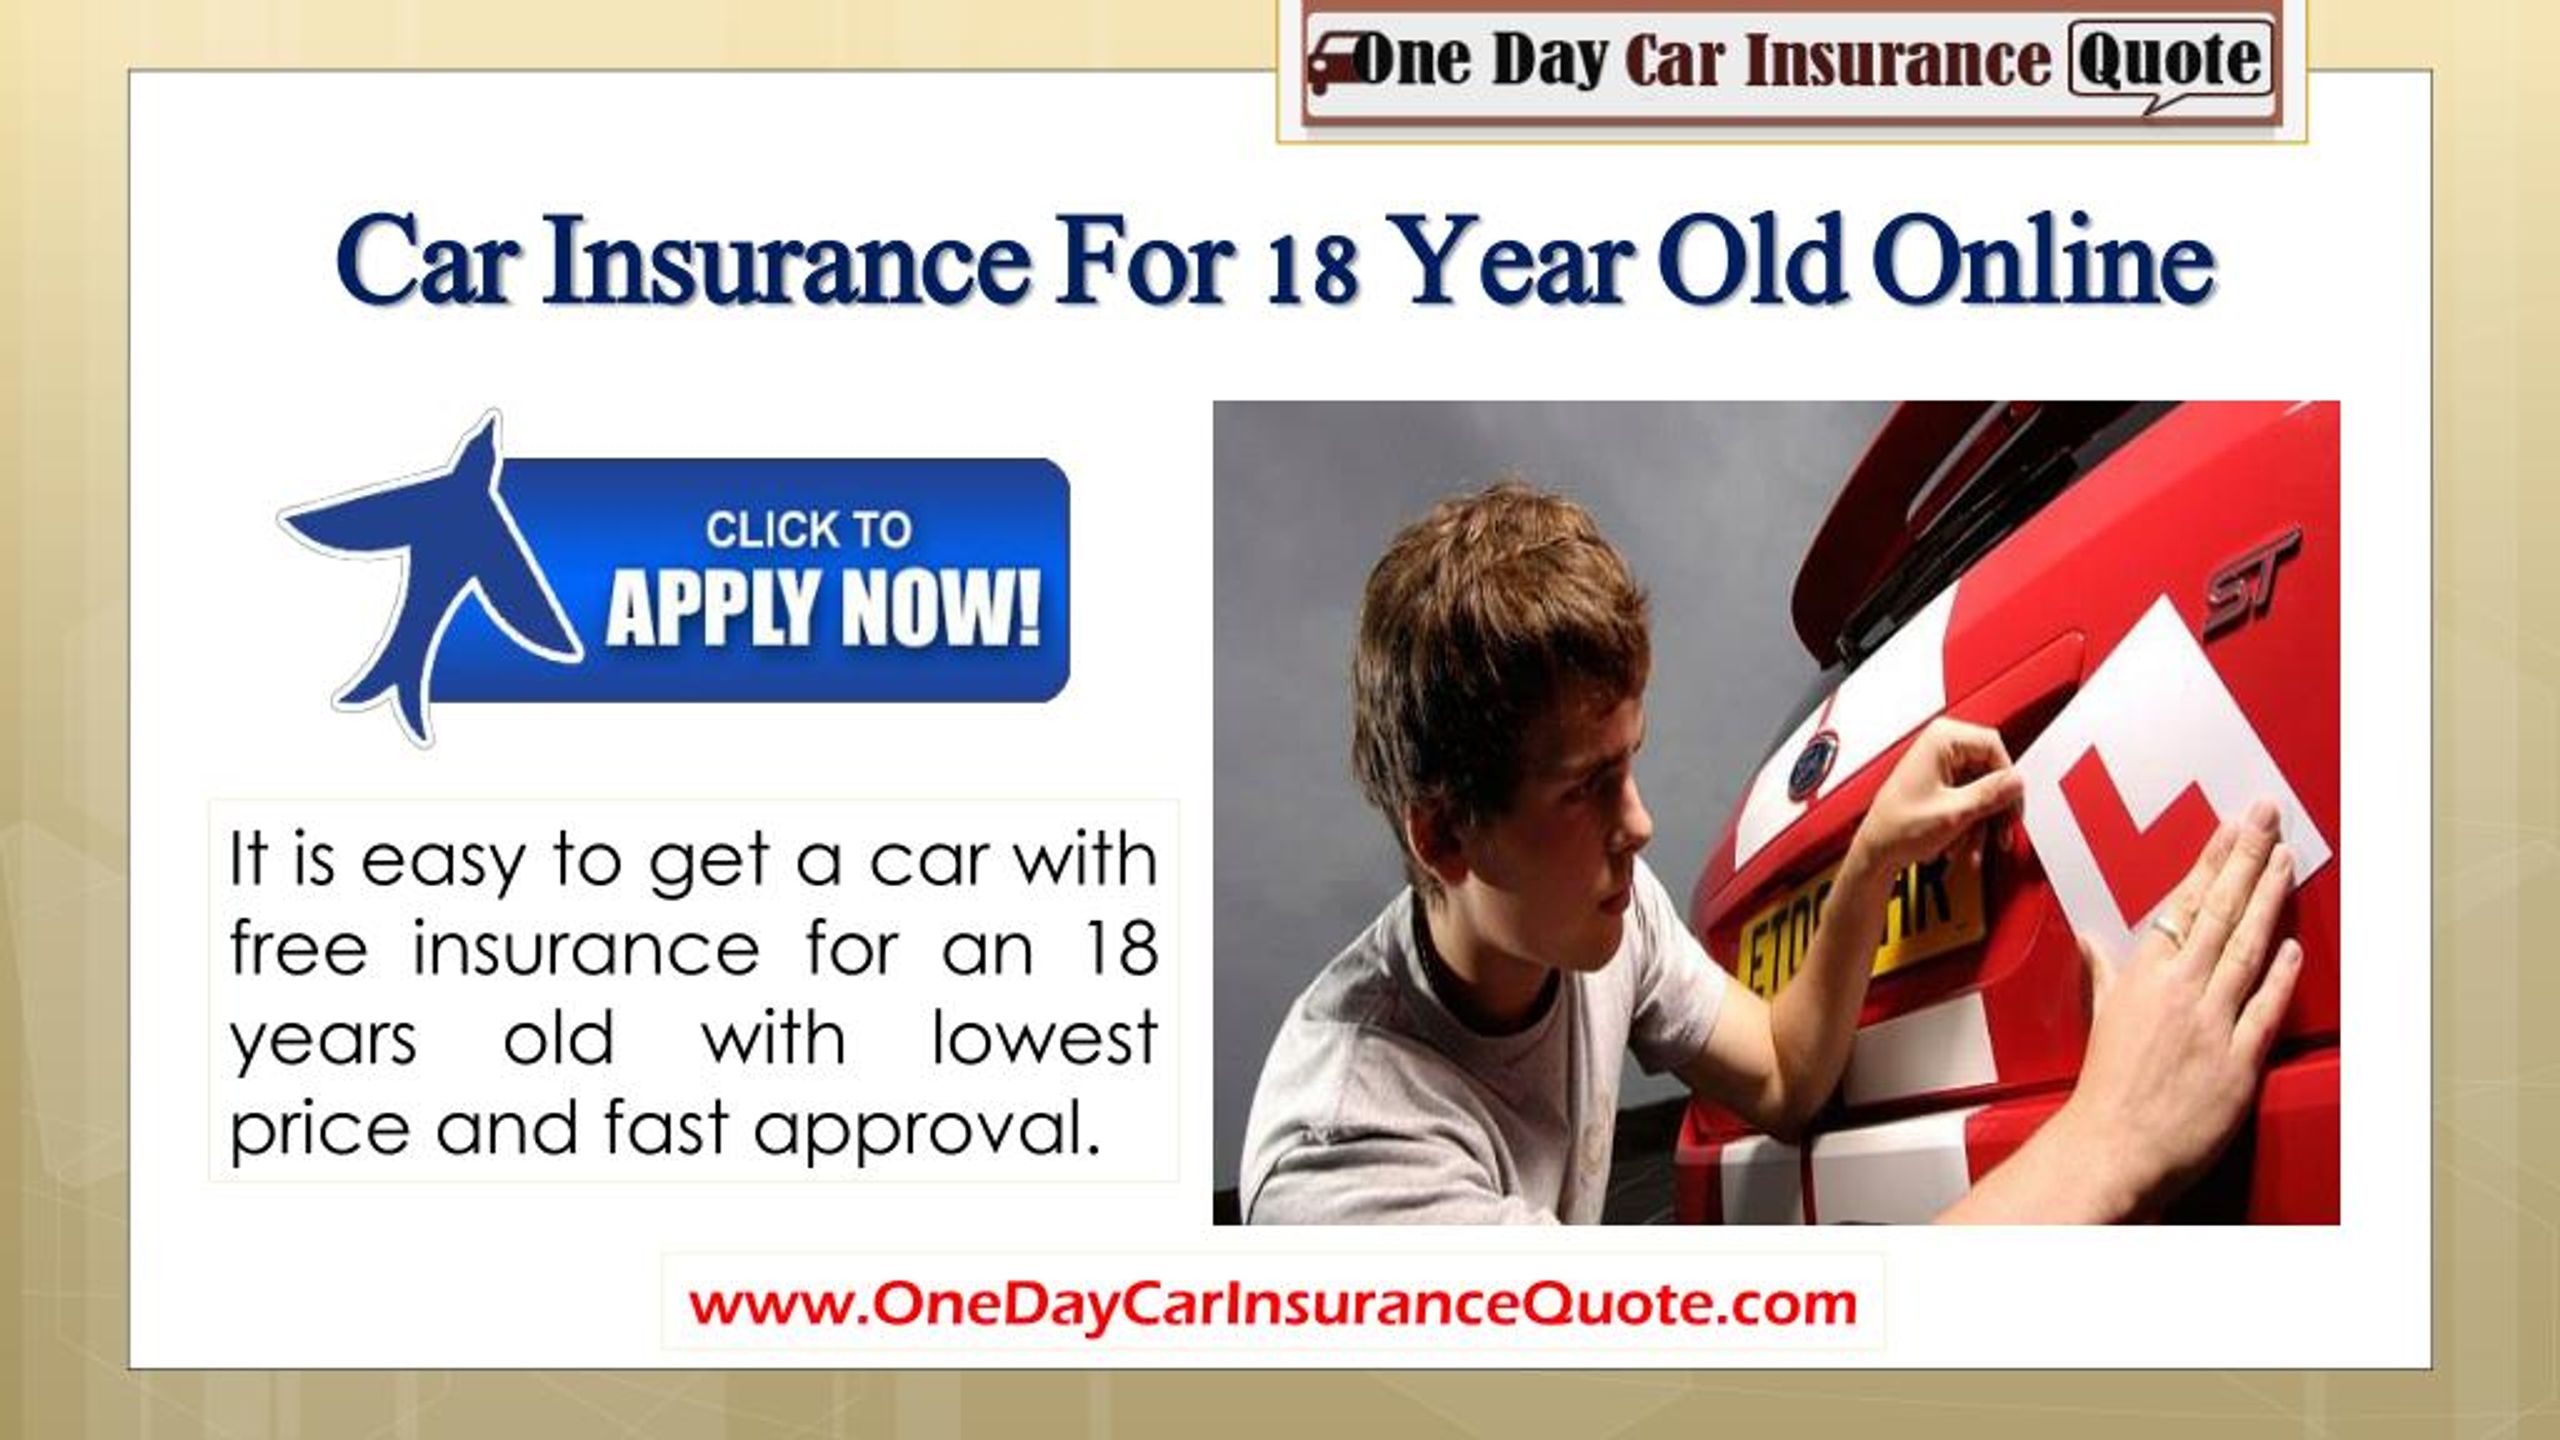 Day Insurance 18 Year Old : Average Car Insurance Cost 2021